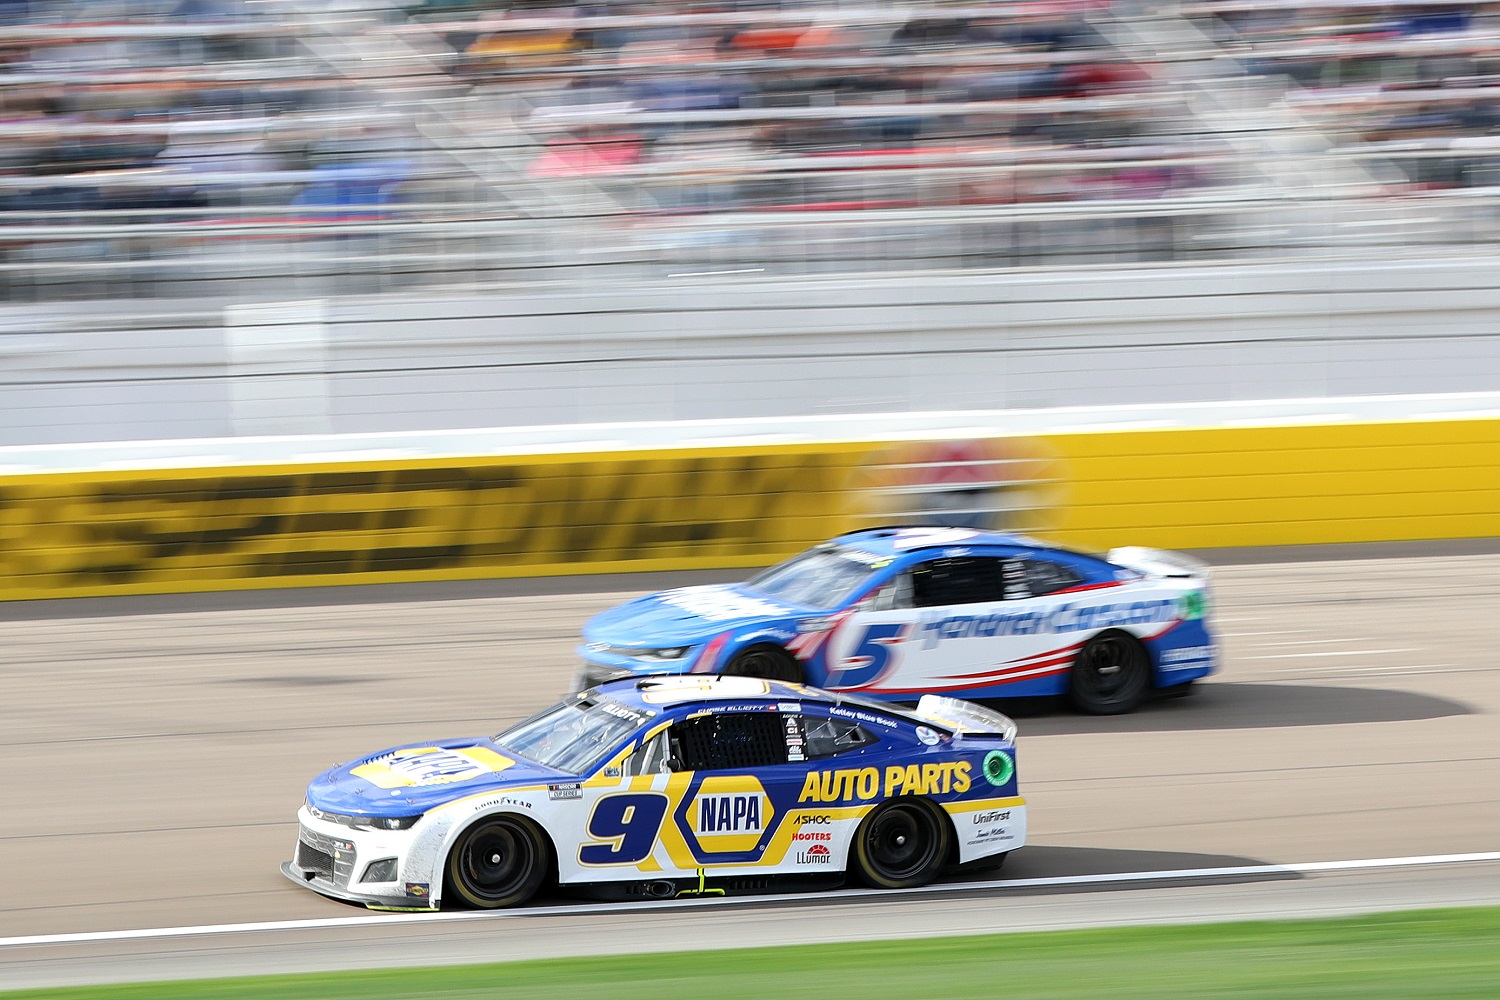 Chase Elliott and Kyle Larson race during the NASCAR Cup Series Pennzoil 400 at Las Vegas Motor Speedway on March 06, 2022.